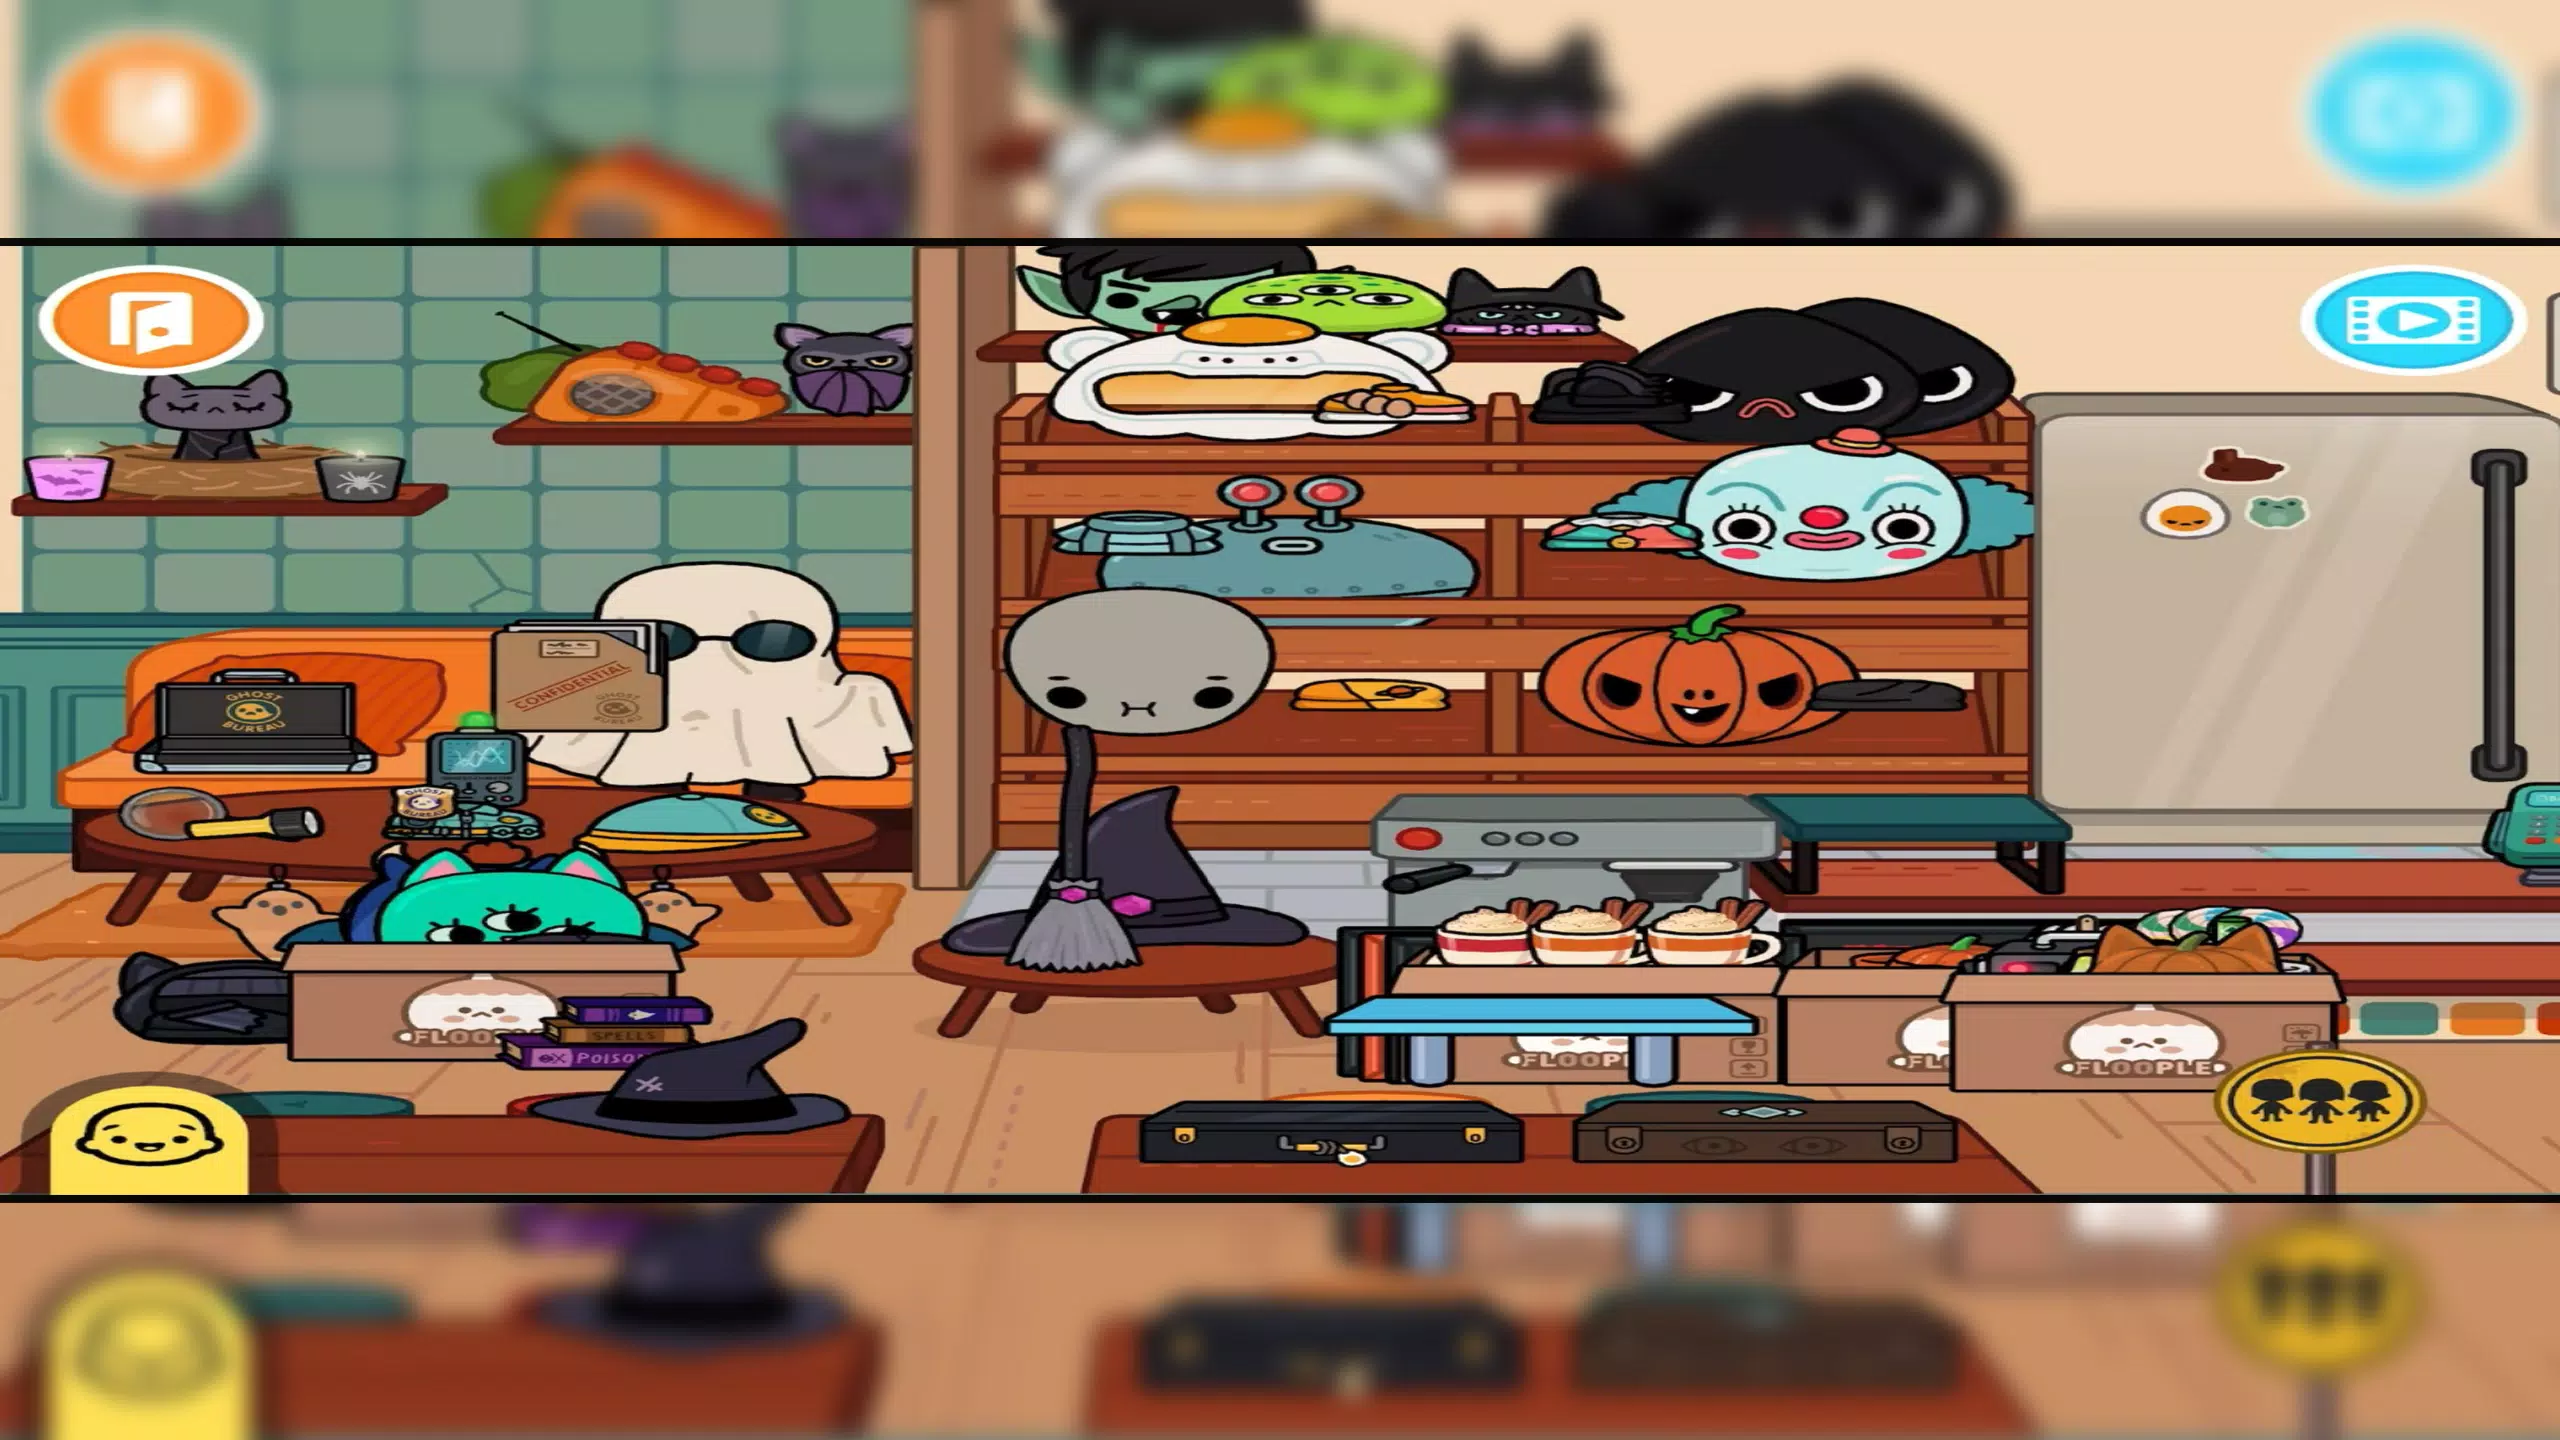 Toca Life World APK guide: how to on Android, iOS, and PC. Pocket Tactics, Toca  Boca HD wallpaper